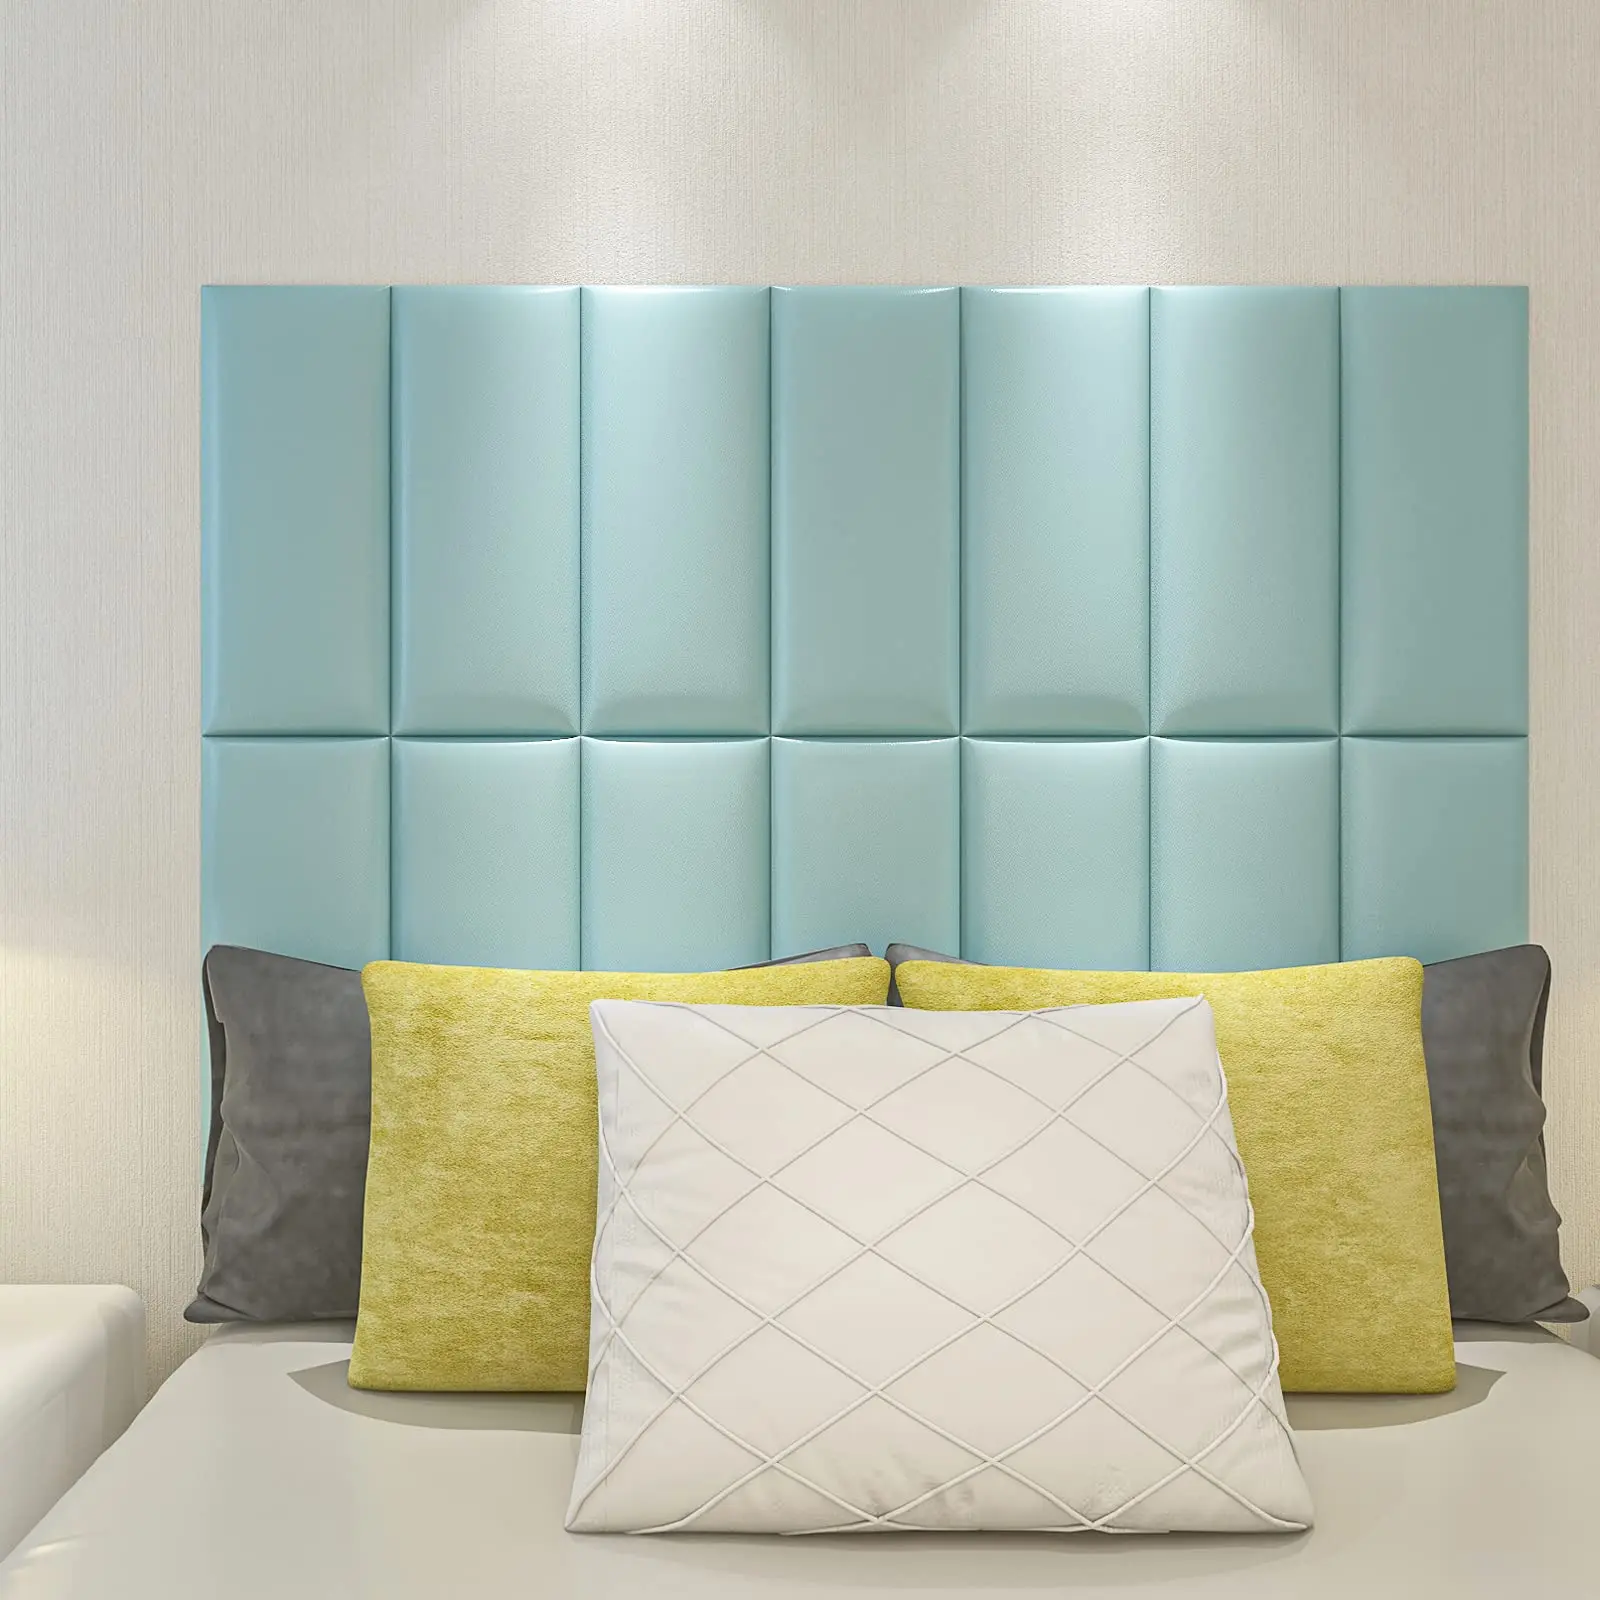 Art3d 9PCS Peel and Stick Headboard for Twin in Teal, Sized 25 x 60cm , 3D Upholstered Wall Panels